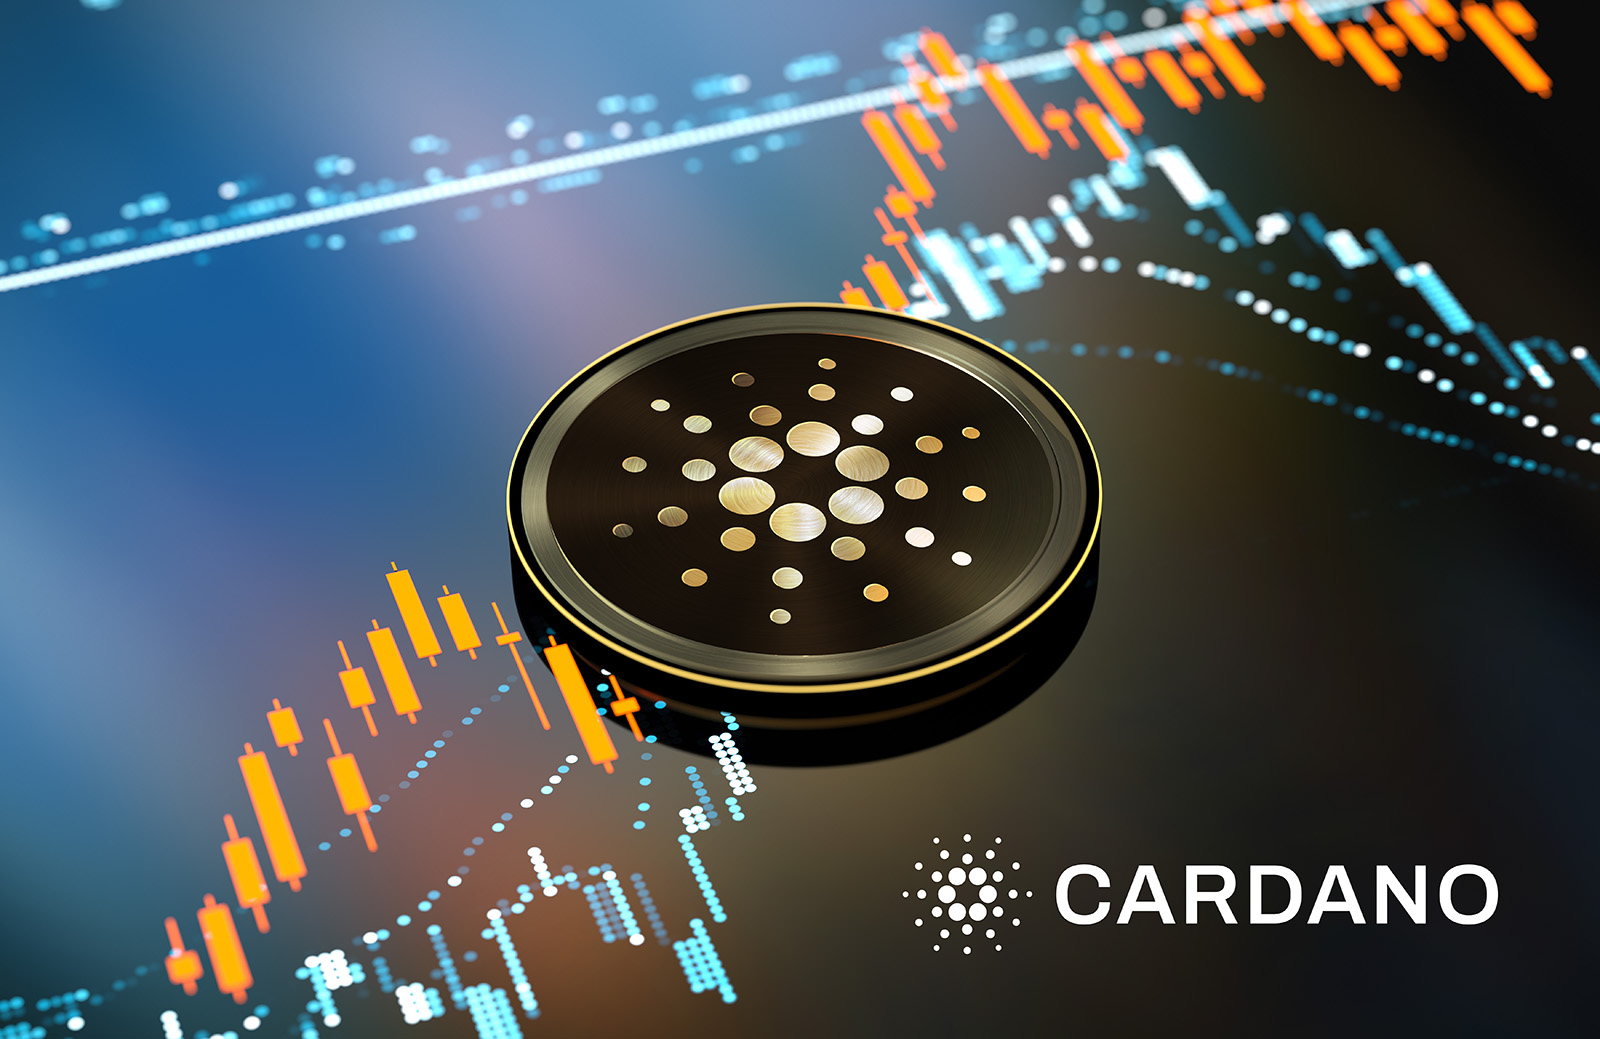 Cardano featured image - composite of crypto coin with dynamic background